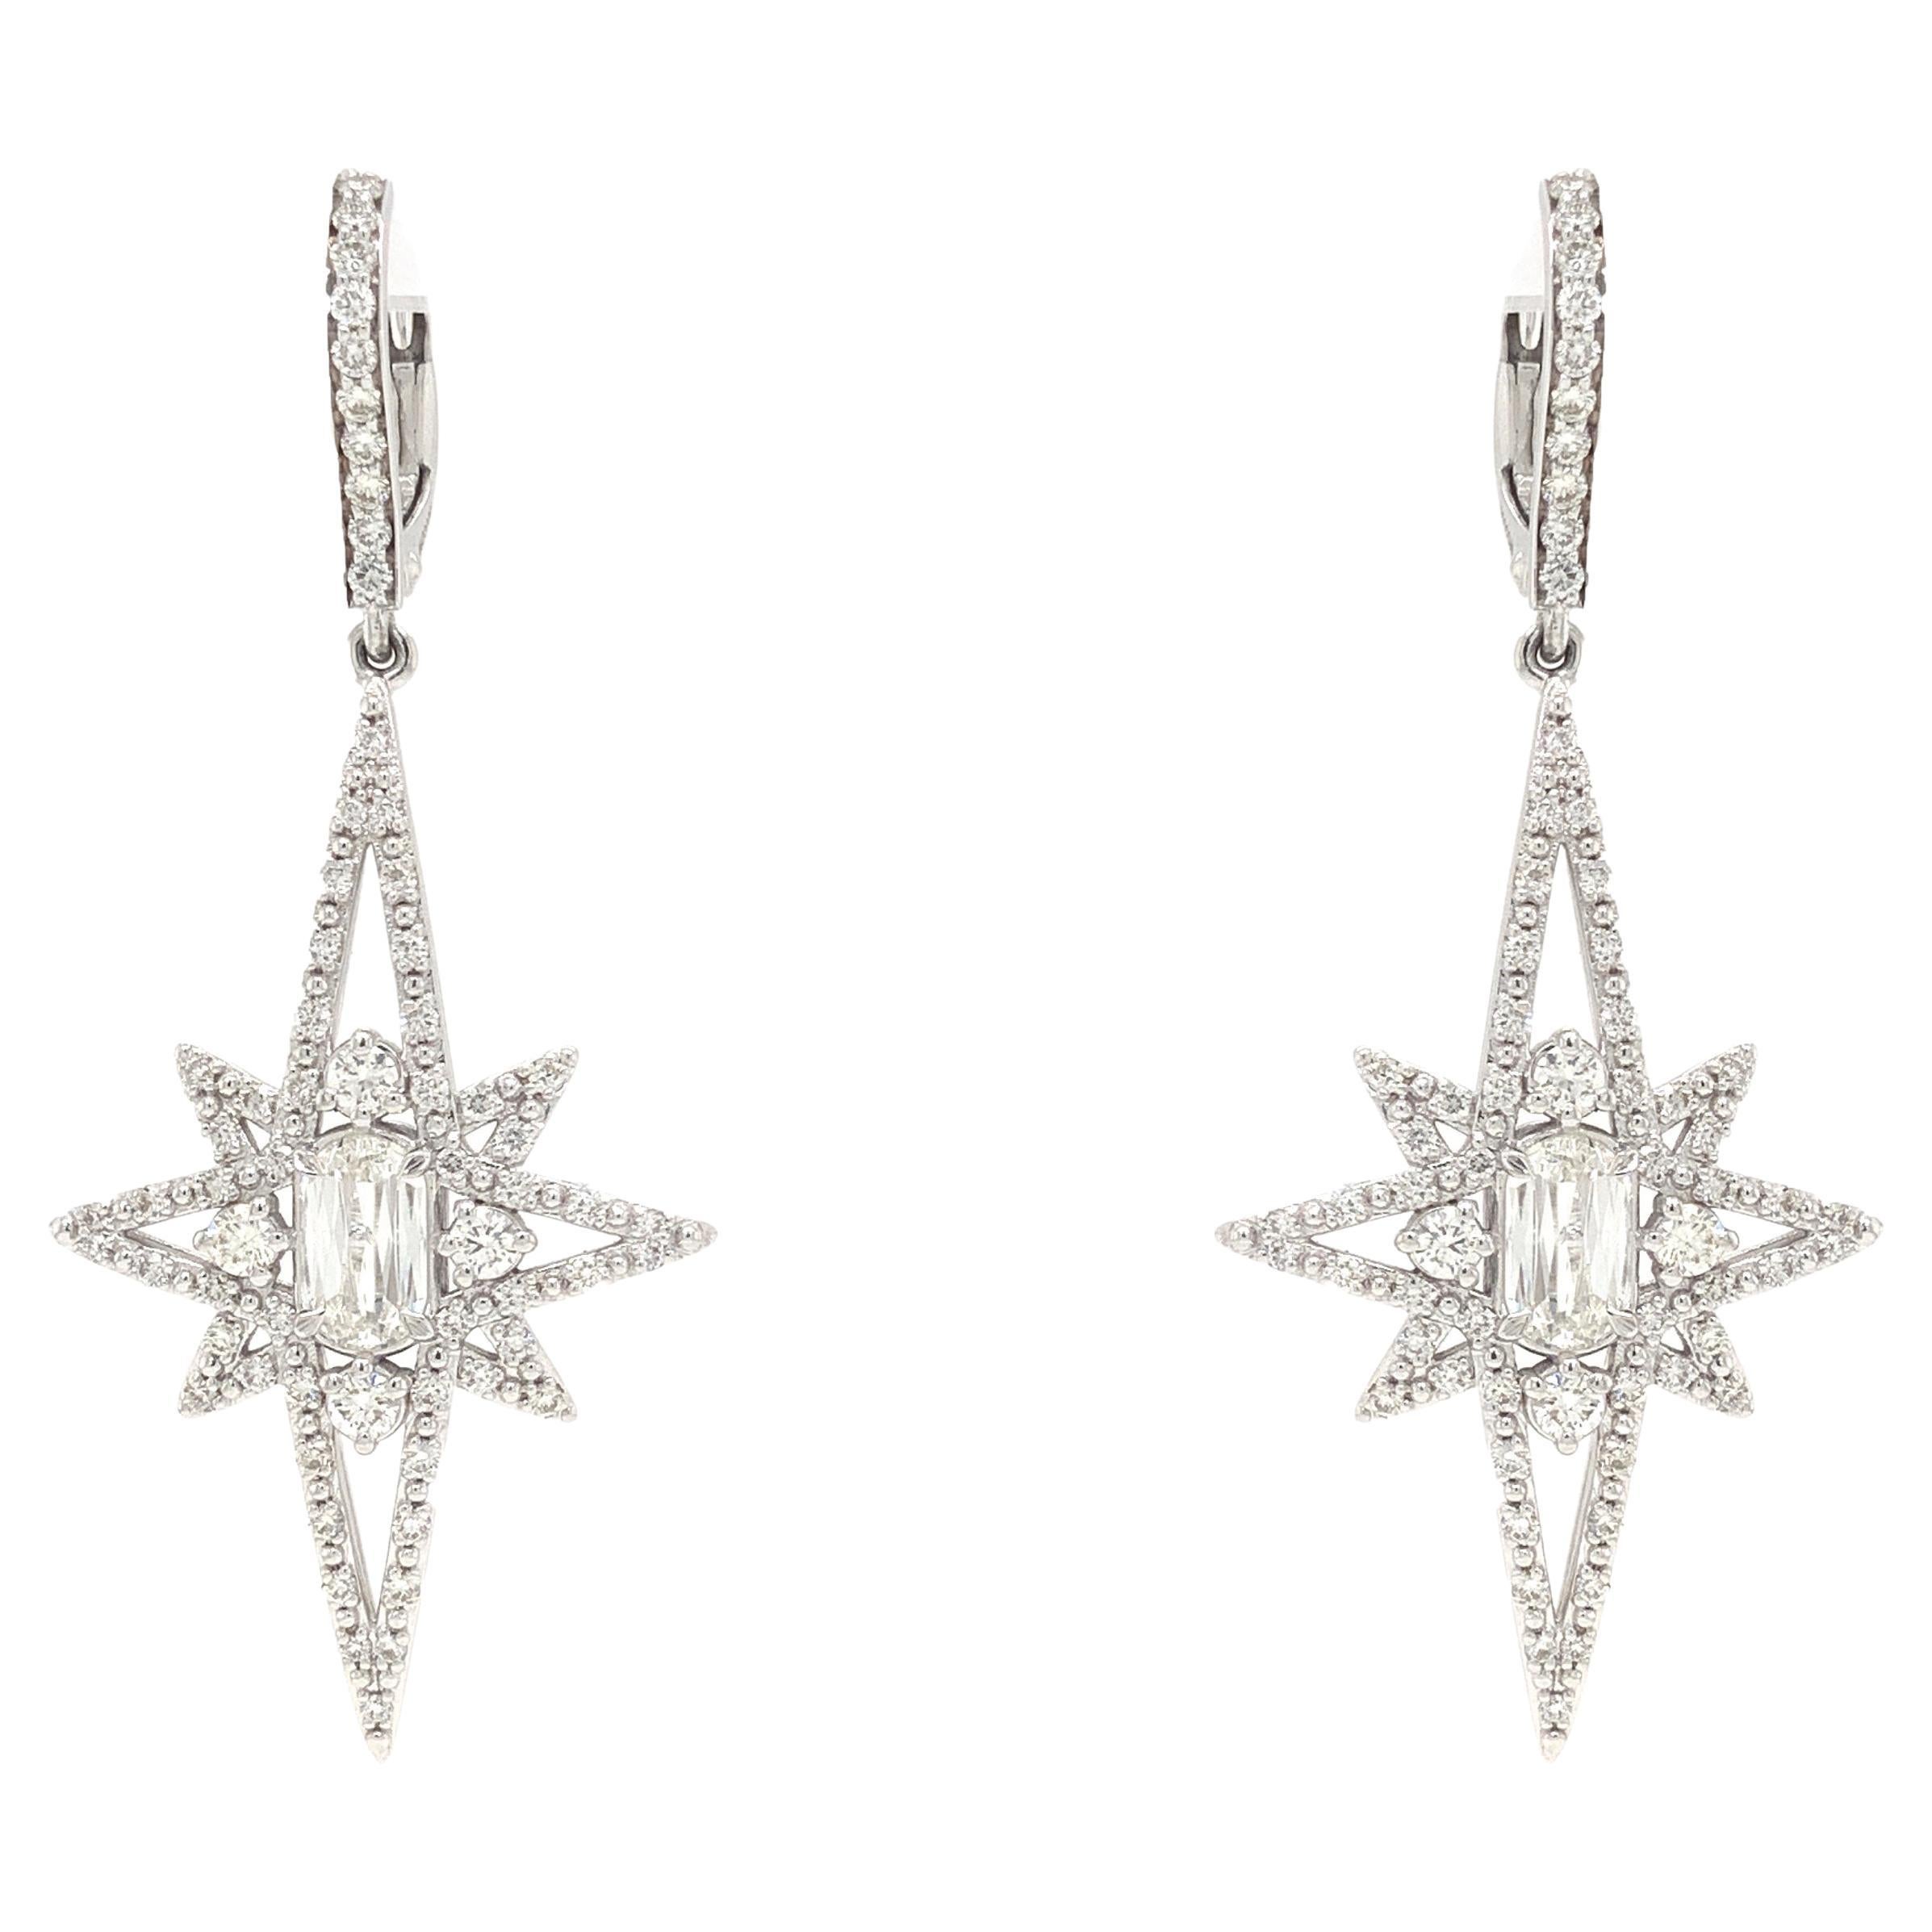 Christopher Designs Crisscut L'Amour Drop Earrings Brilliantly Shining Stars